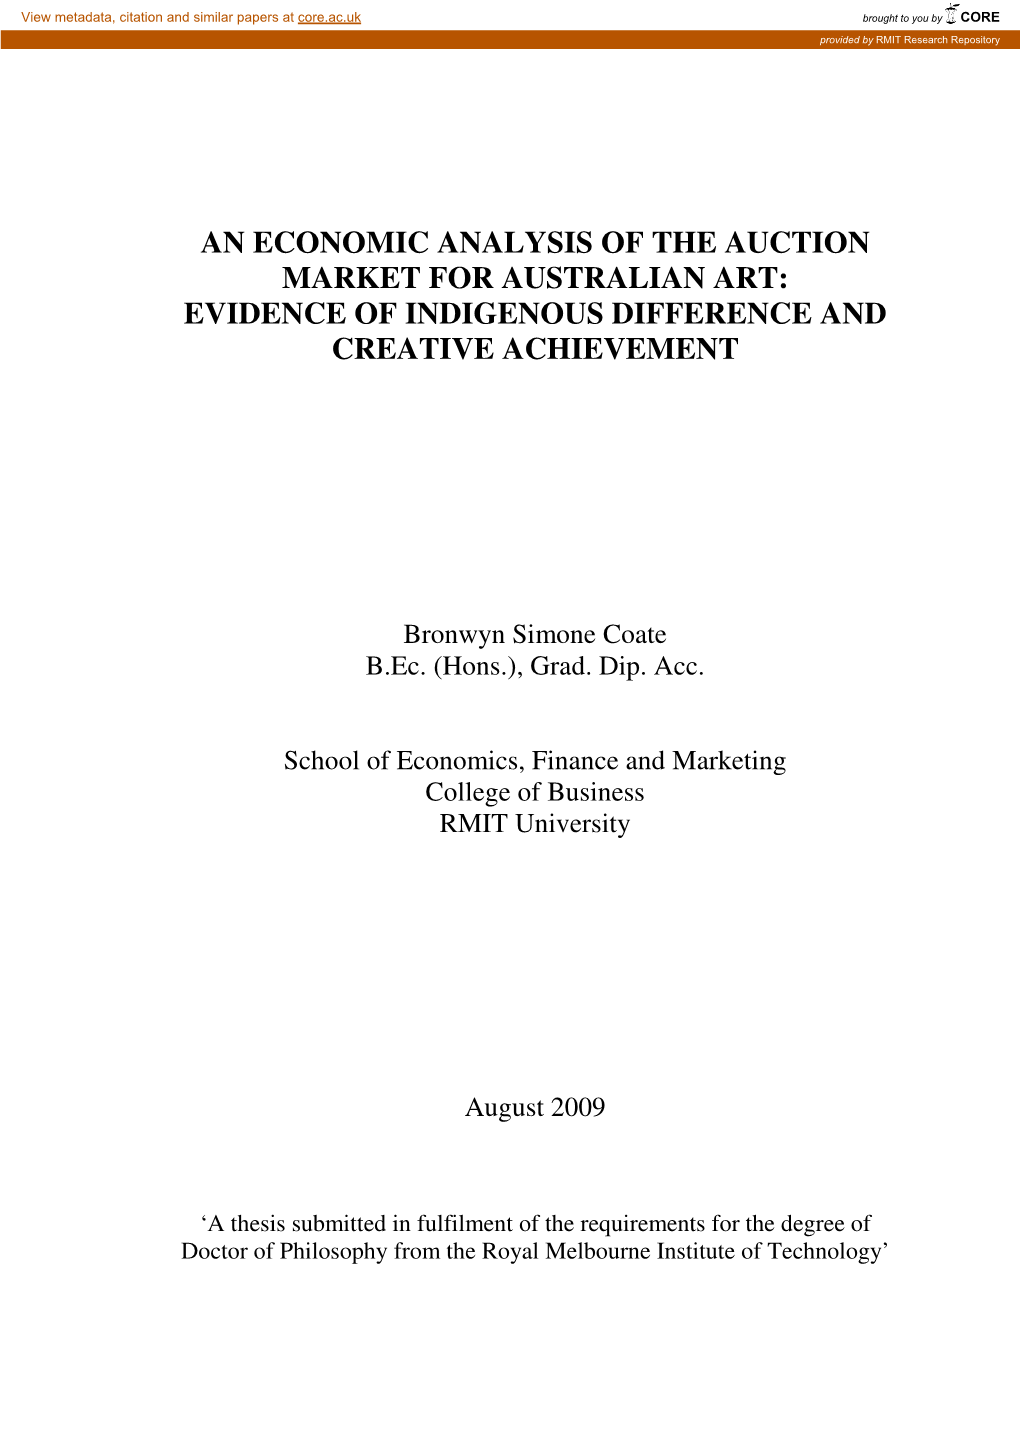 An Economic Analysis of the Auction Market for Australian Art: Evidence of Indigenous Difference and Creative Achievement